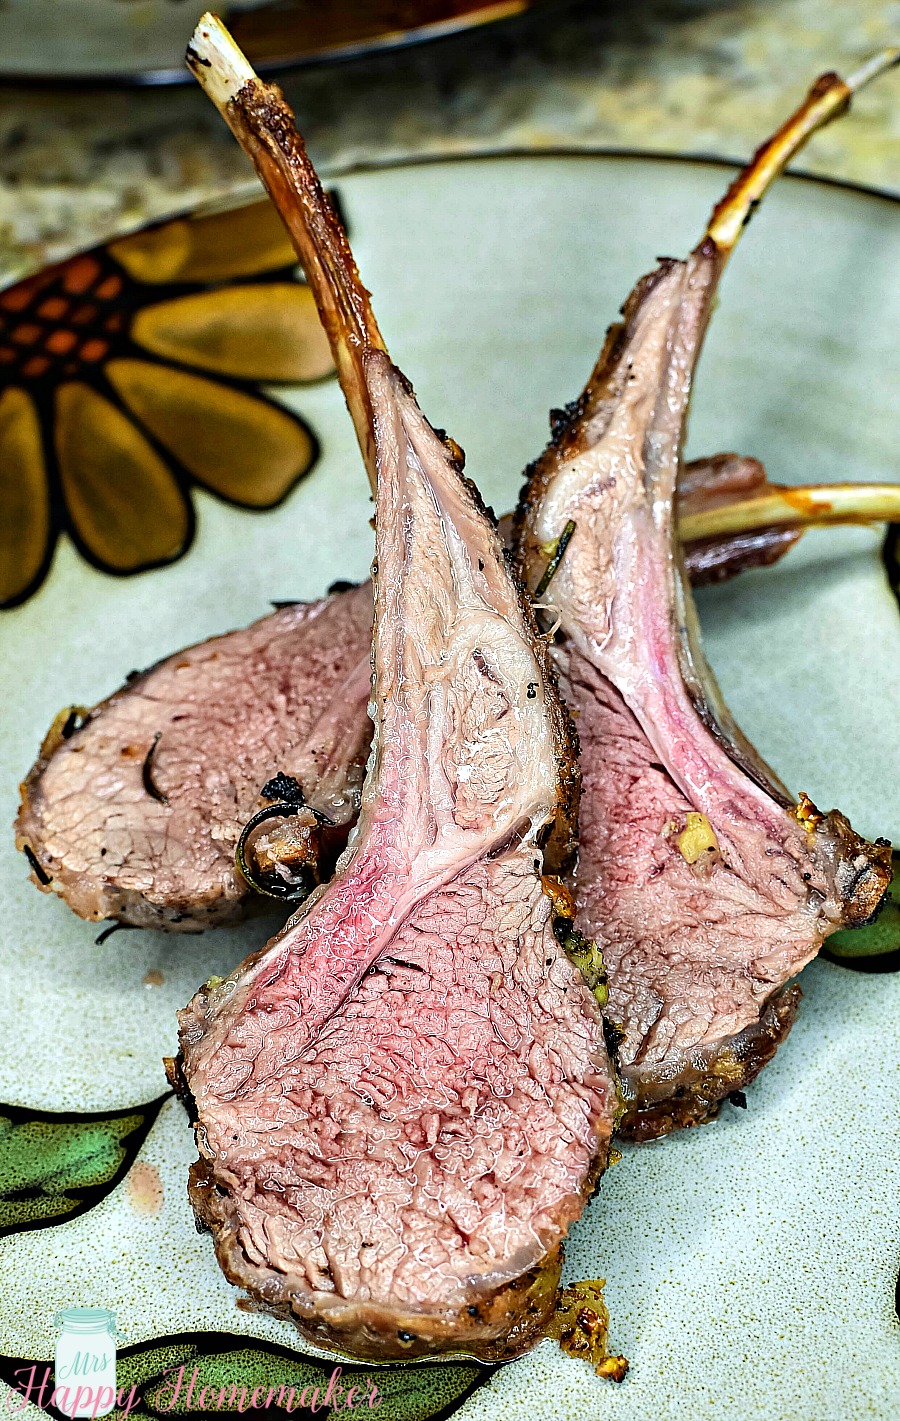 Roasted Rack of Lamb - 3 pieces on a plate 